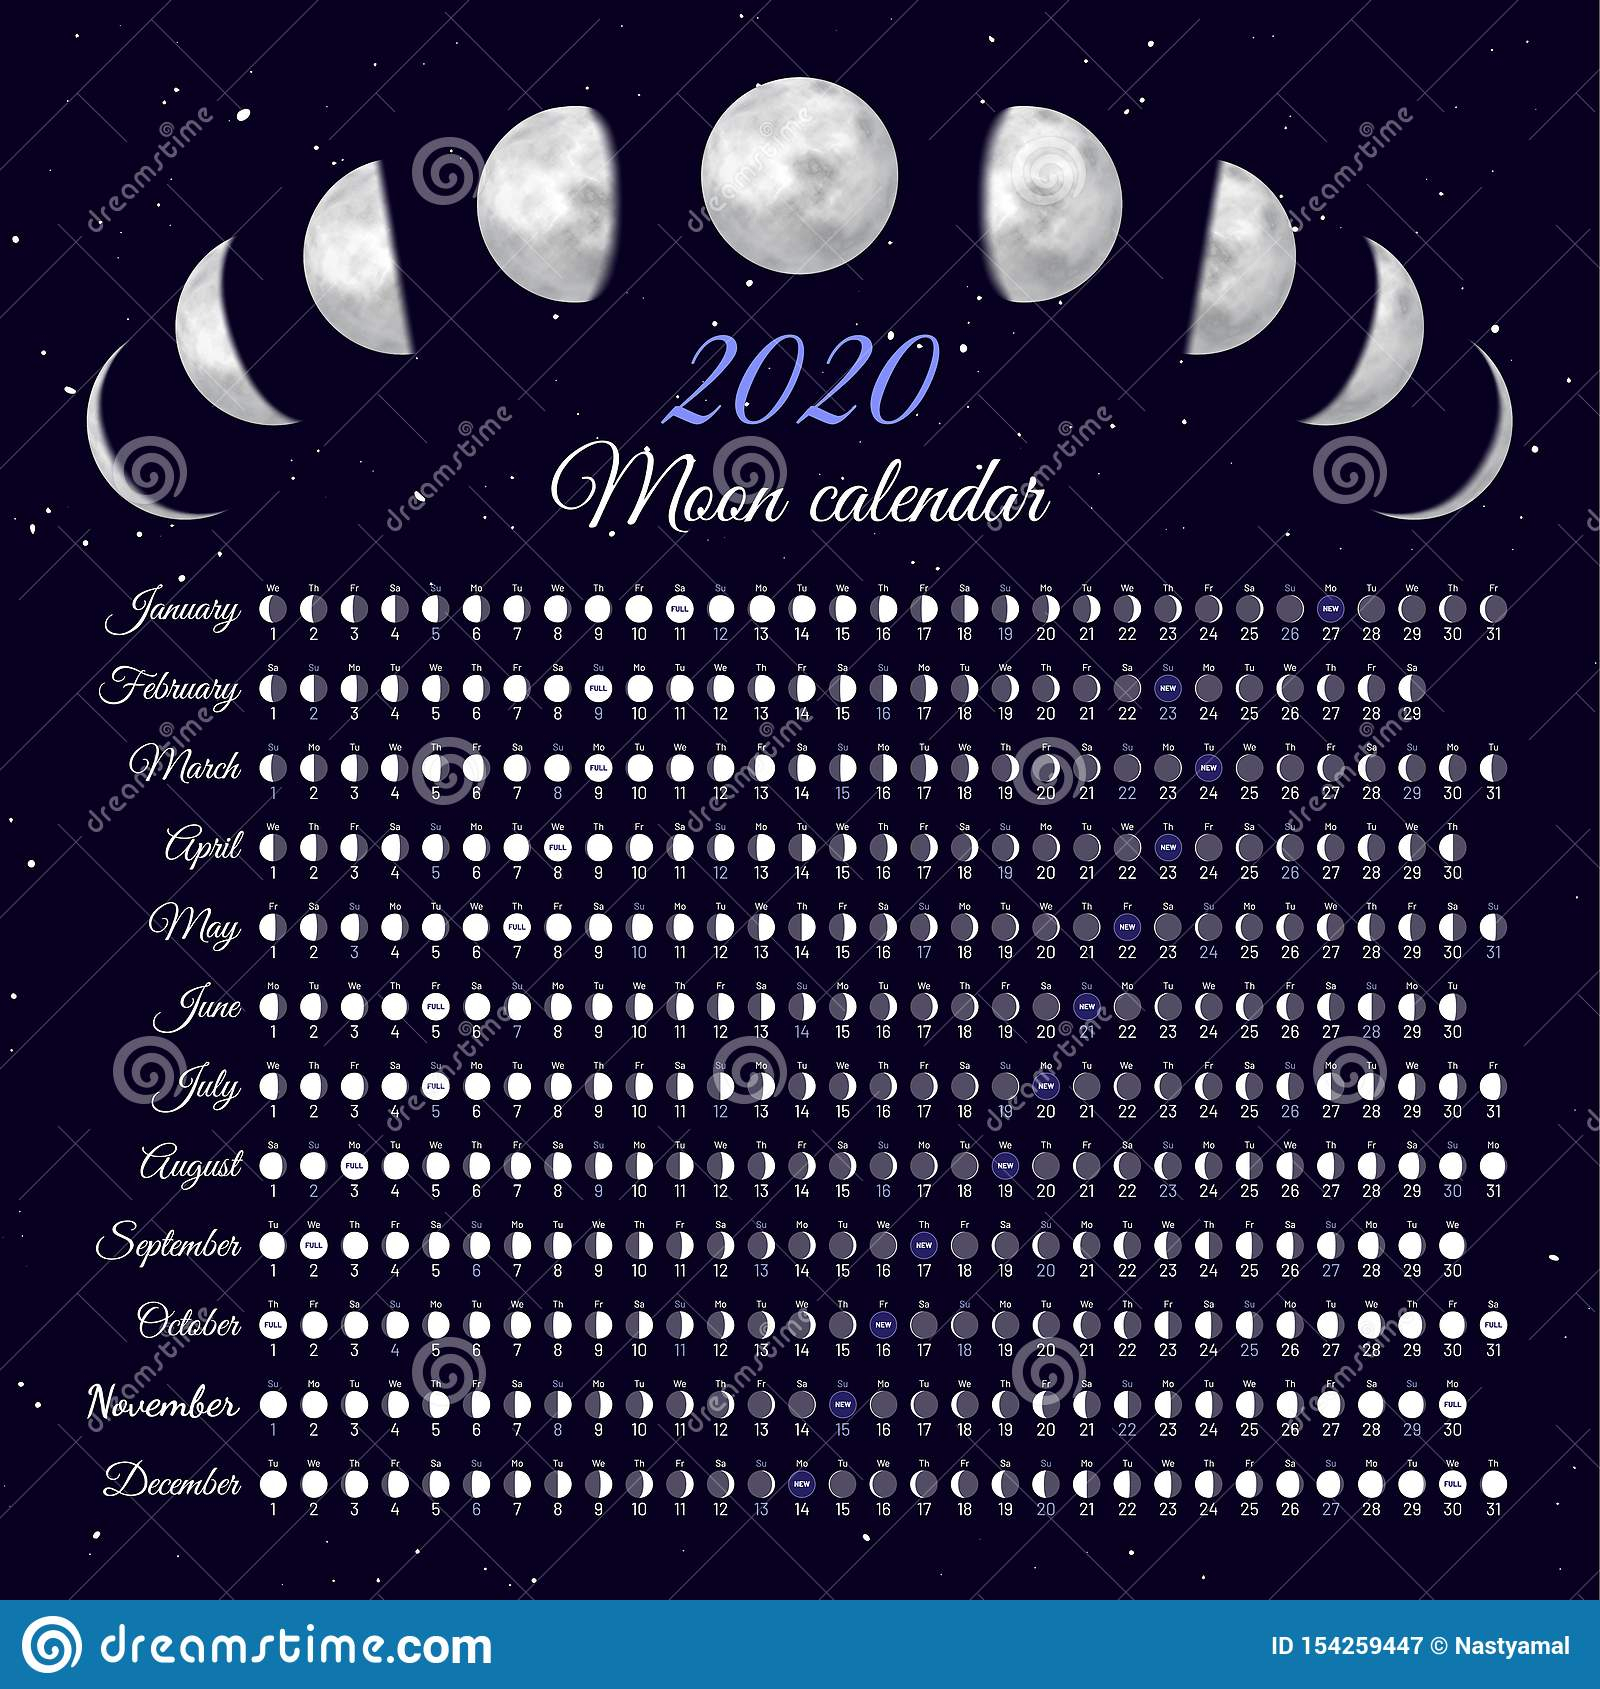 Lunar Cycles At 2020 Year. Stock Vector. Illustration Of